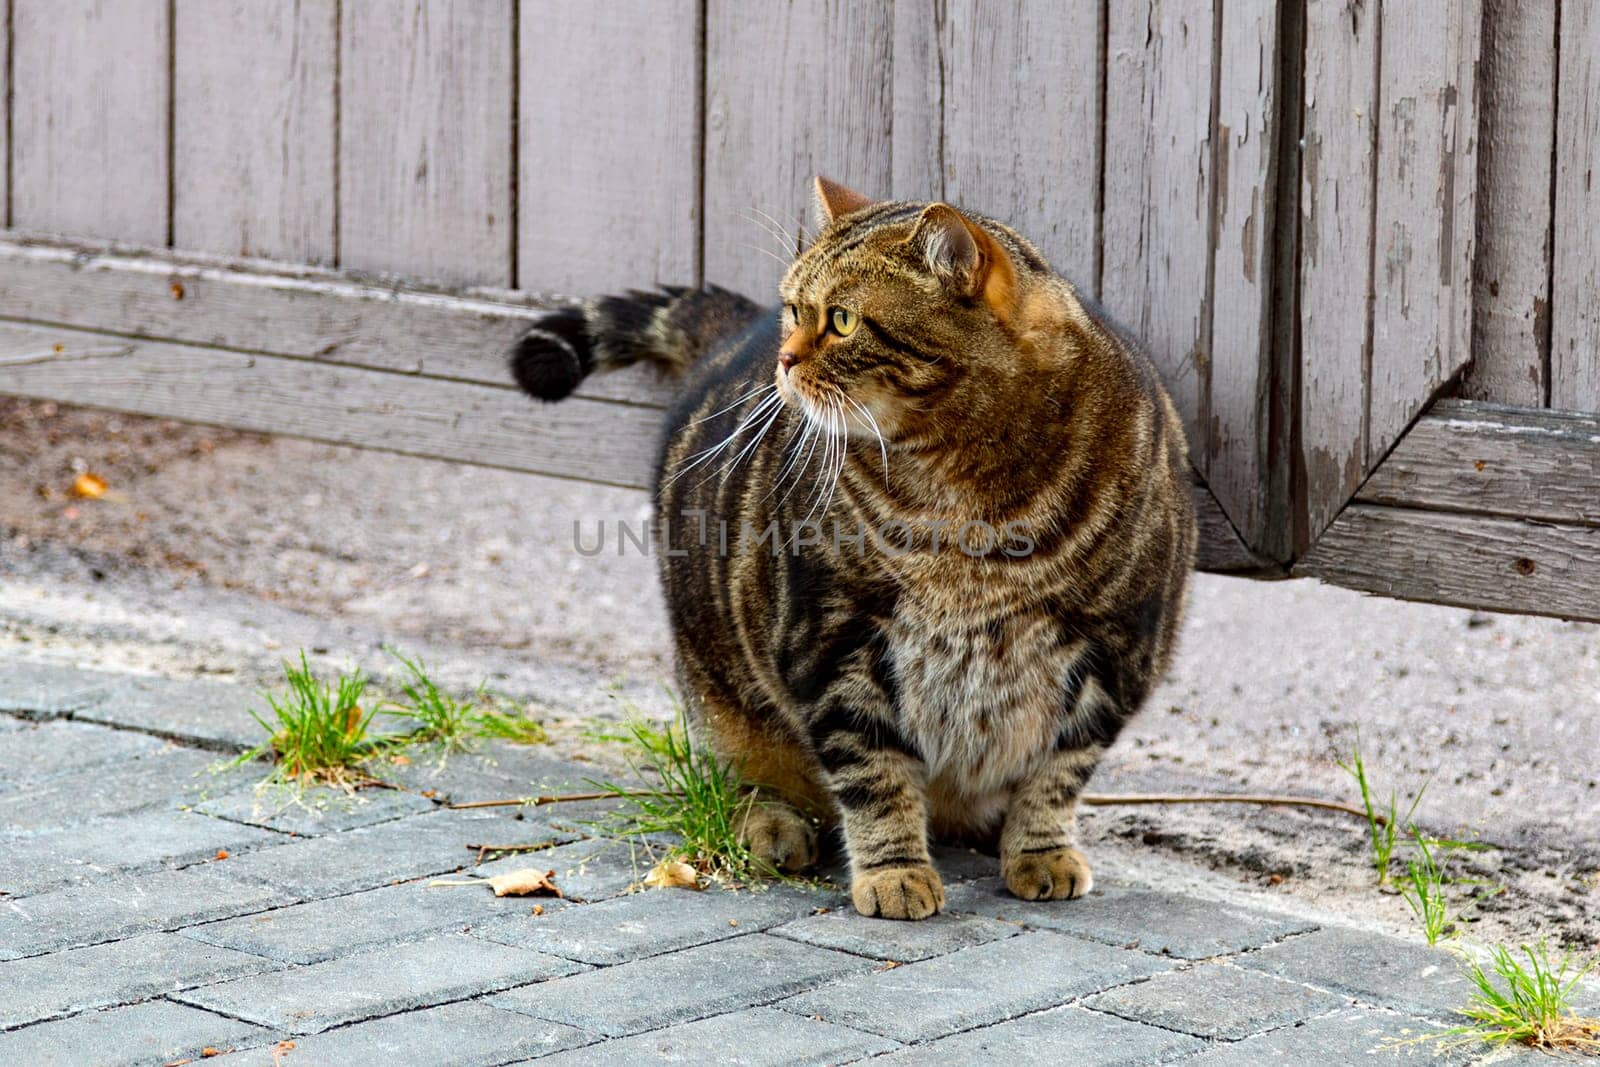 Cute fat tabby cat sitting on a stone street in the city